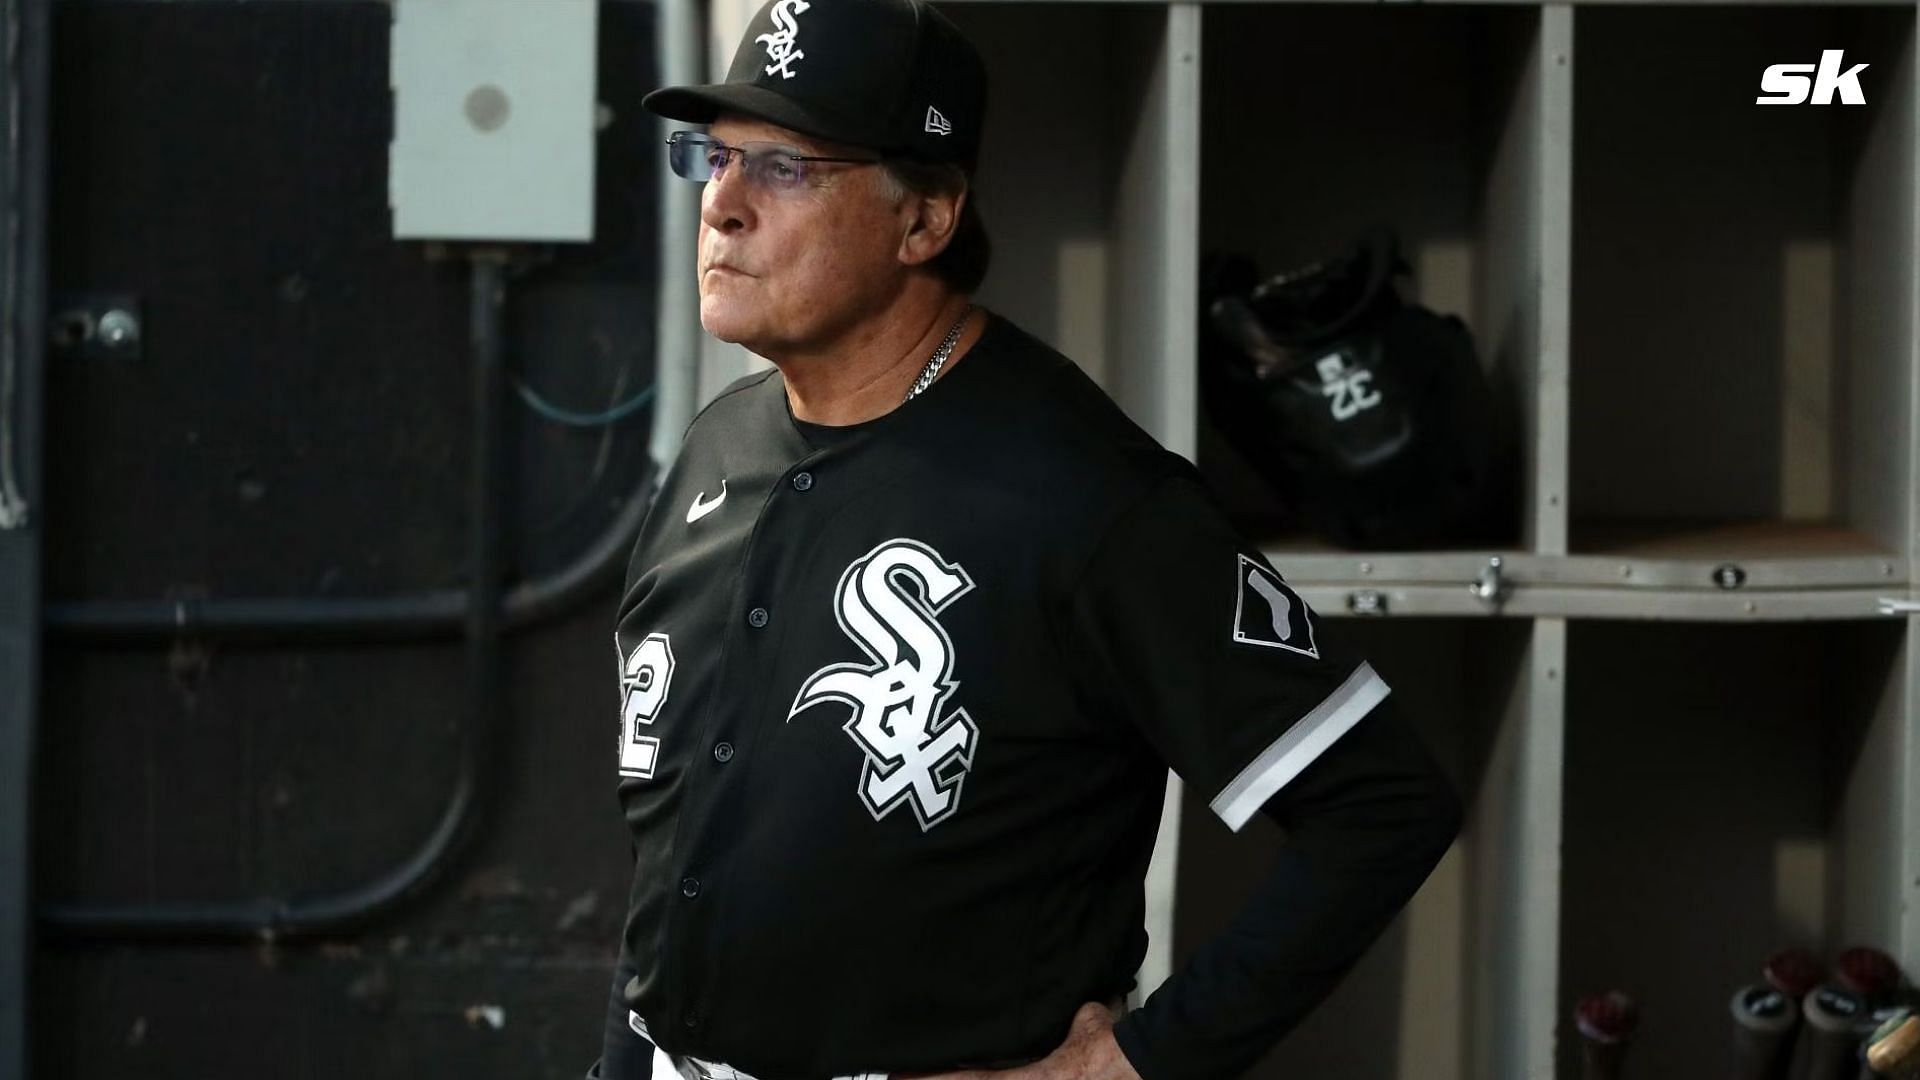 Former MLB manager Tony LaRussa called out White Sox player Yermin Mercedes for running up the score in a blowout game